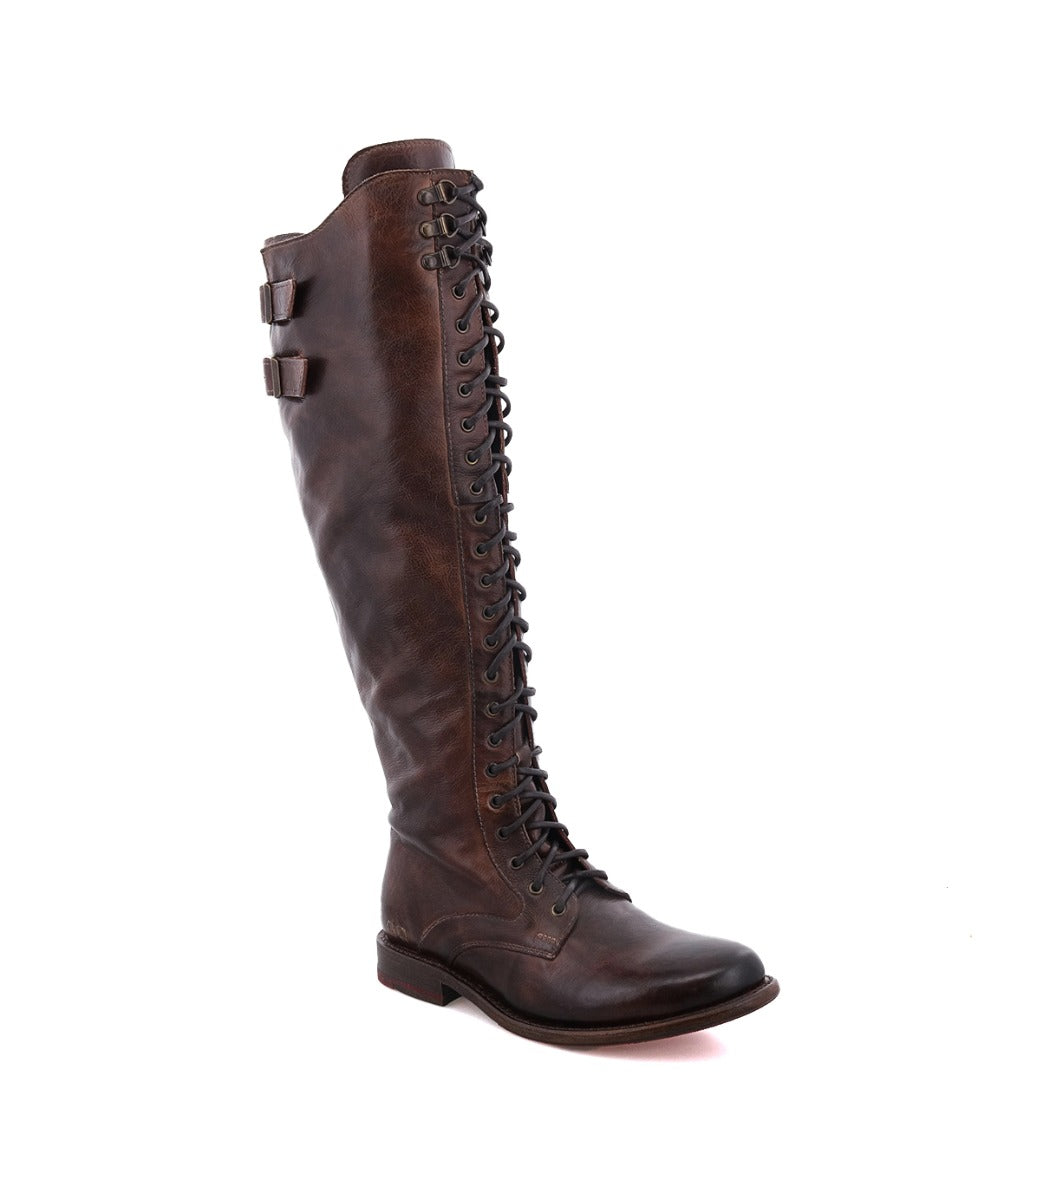 A women's brown boot with laces and buckles, the Della by Bed Stu.